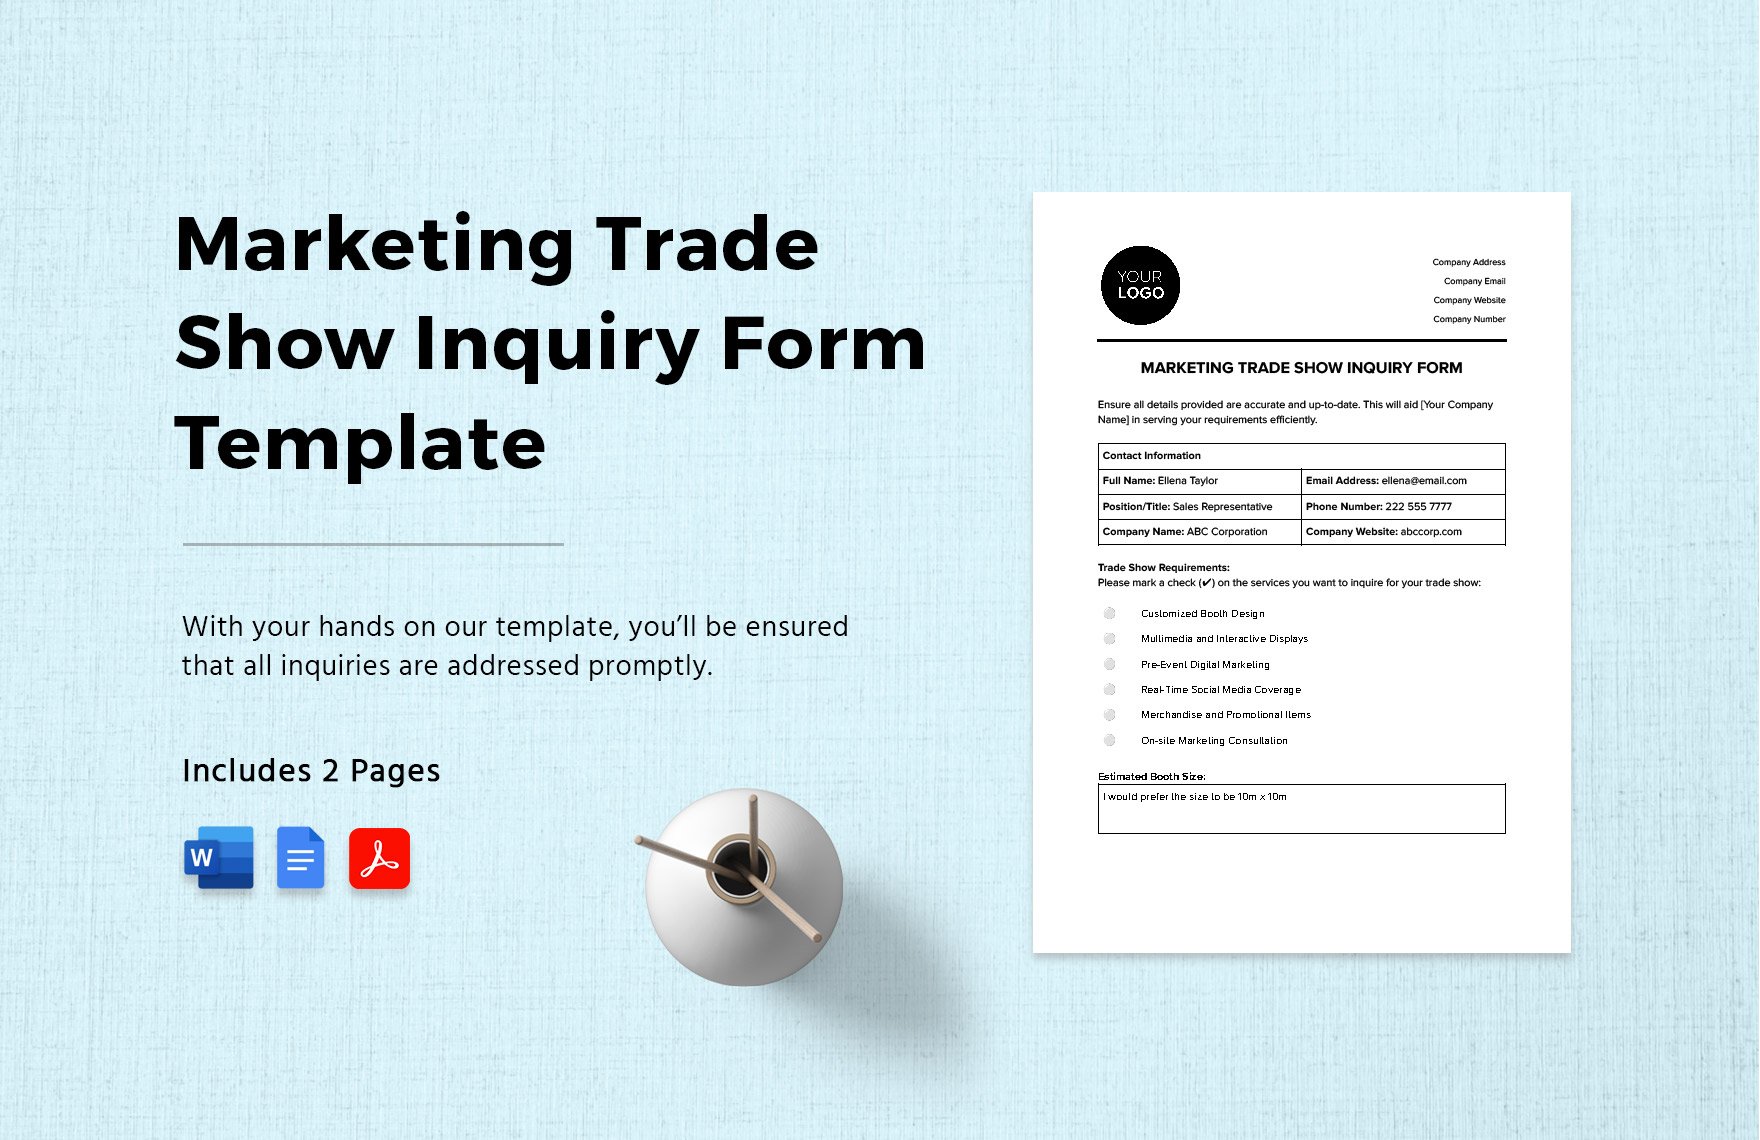 Marketing Trade Show Inquiry Form Template in Word, Google Docs, PDF